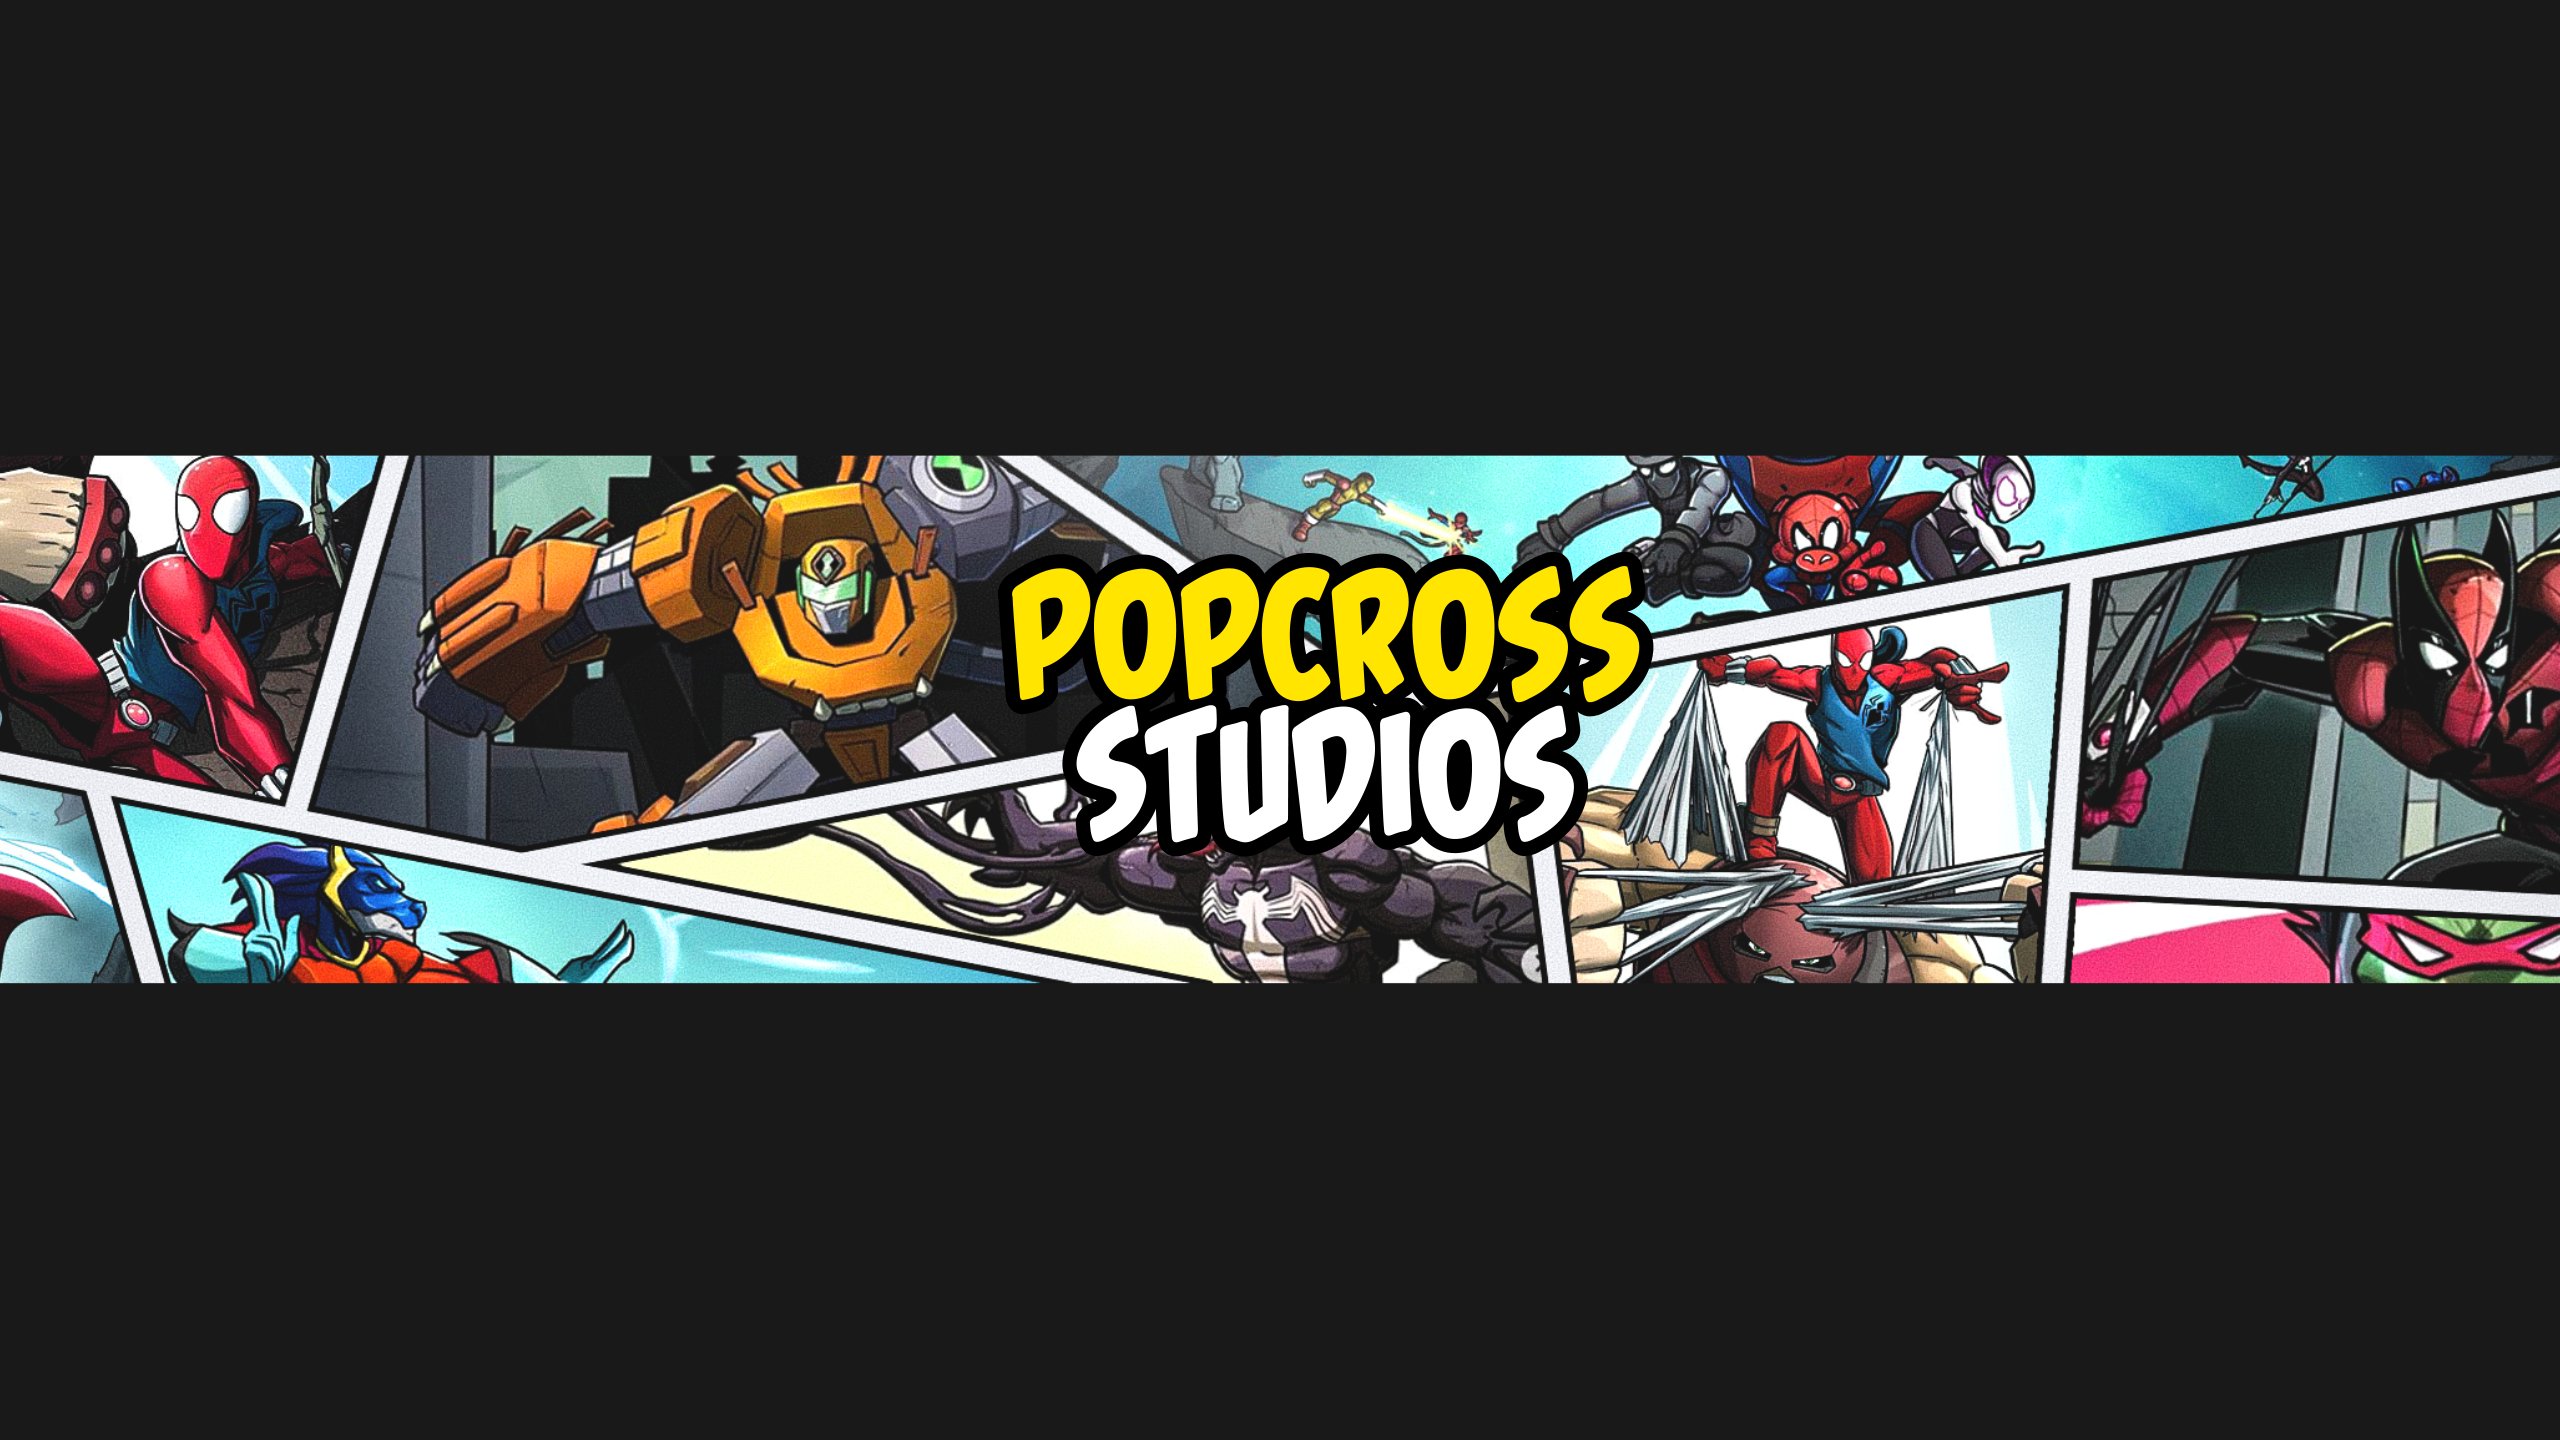 PopCross Studios put some of my art together into a banner for me! Loving how it looks at making it my new twitter banner! Check out his own art